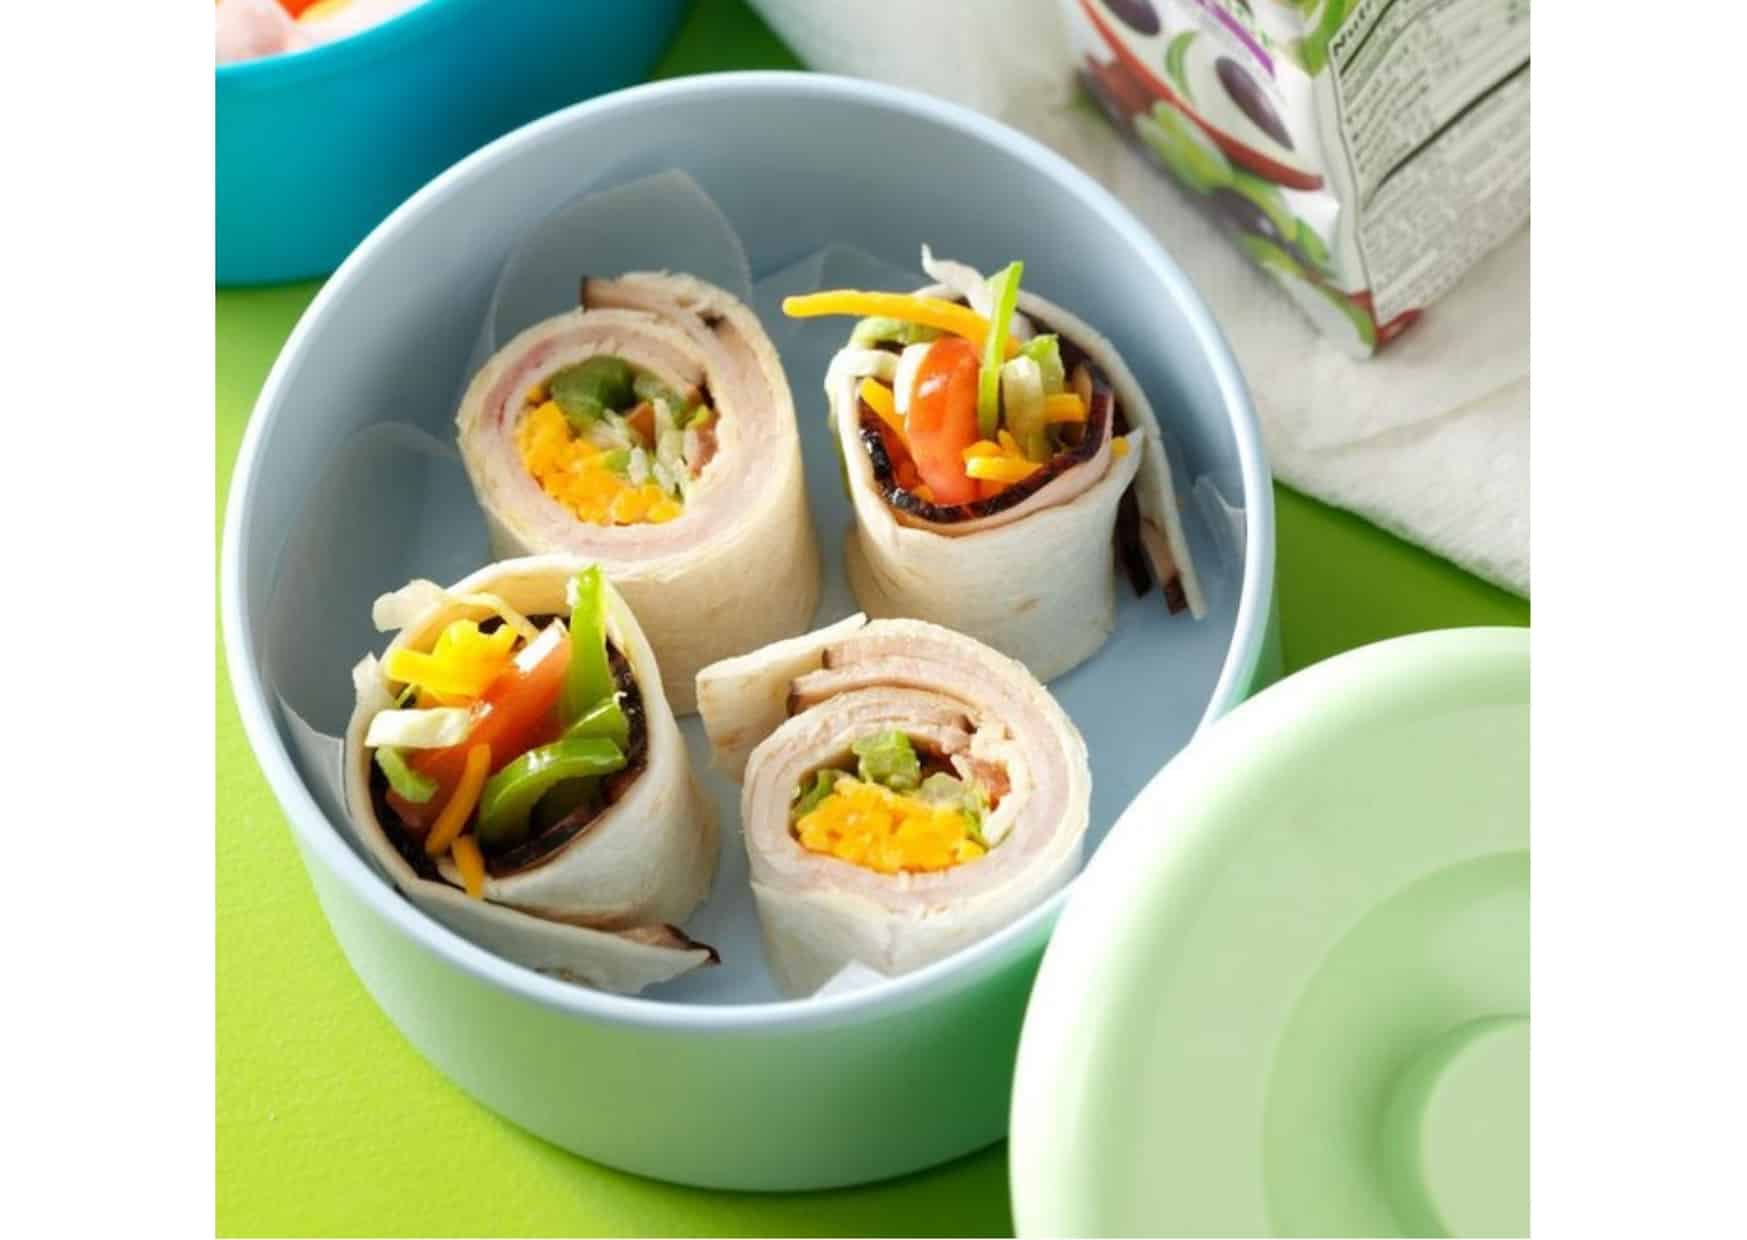 35 Easy And Healthy Dinner Ideas For Kids